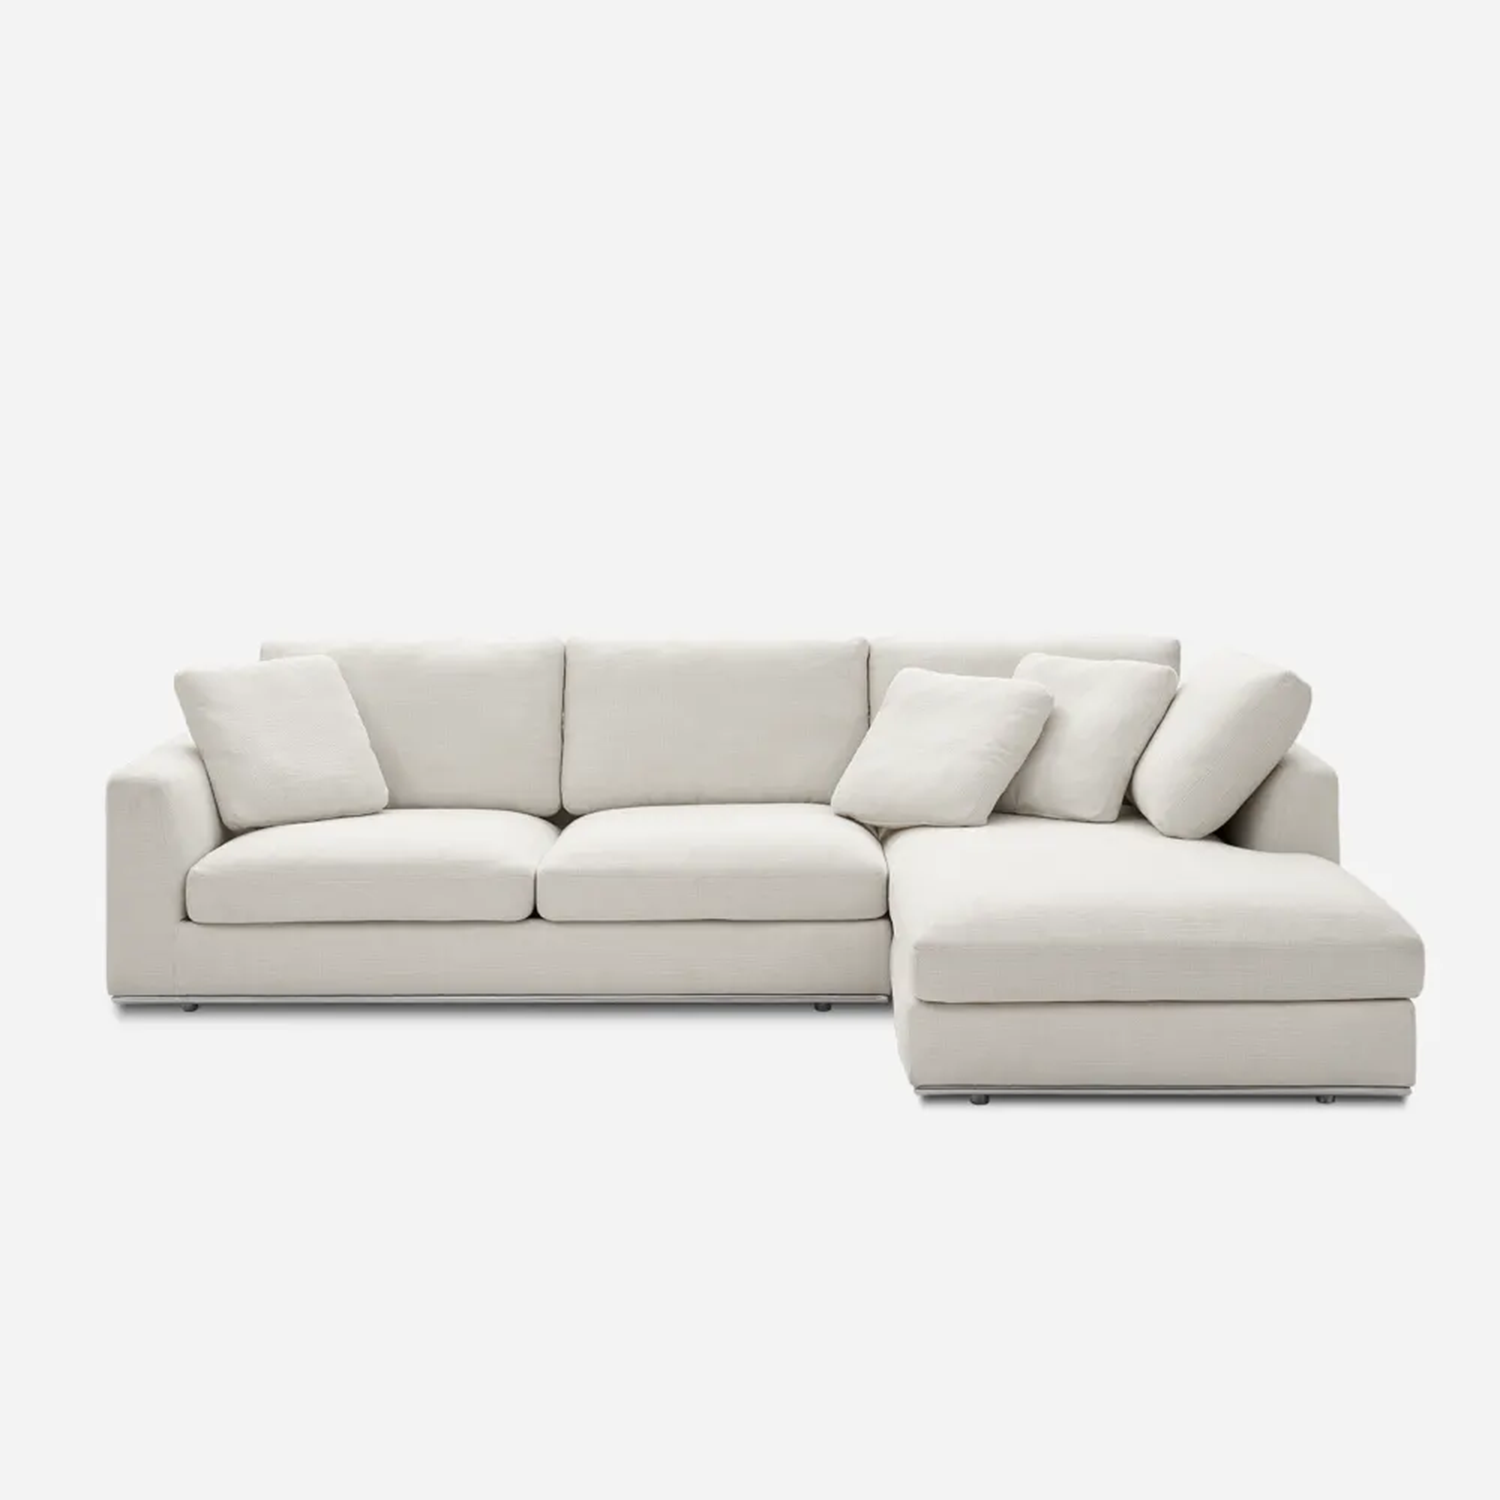 Hamilton-Chaise-Sectional-Sofa-Right-Facing-Brilliant-White-Front